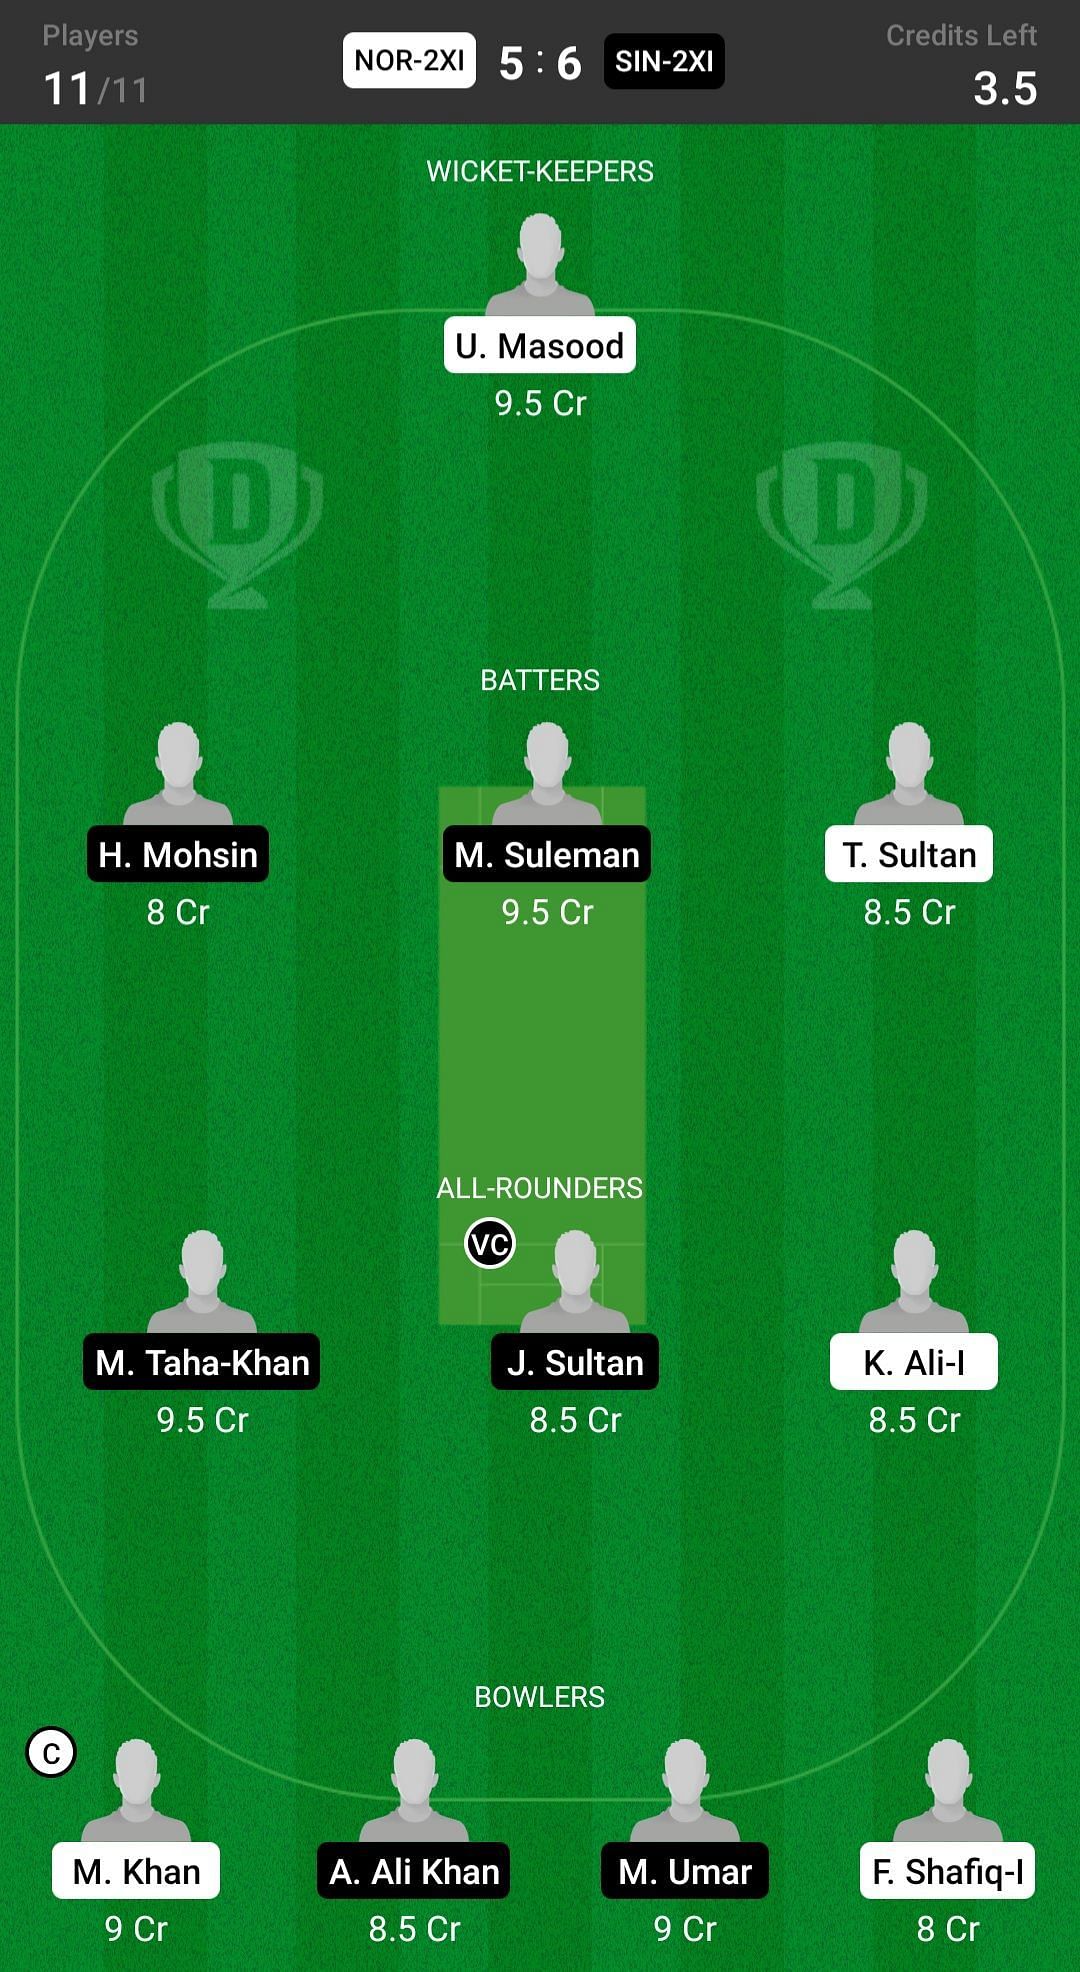 Sindh 2nd XI vs Northern 2nd XI Fantasy suggestion #2